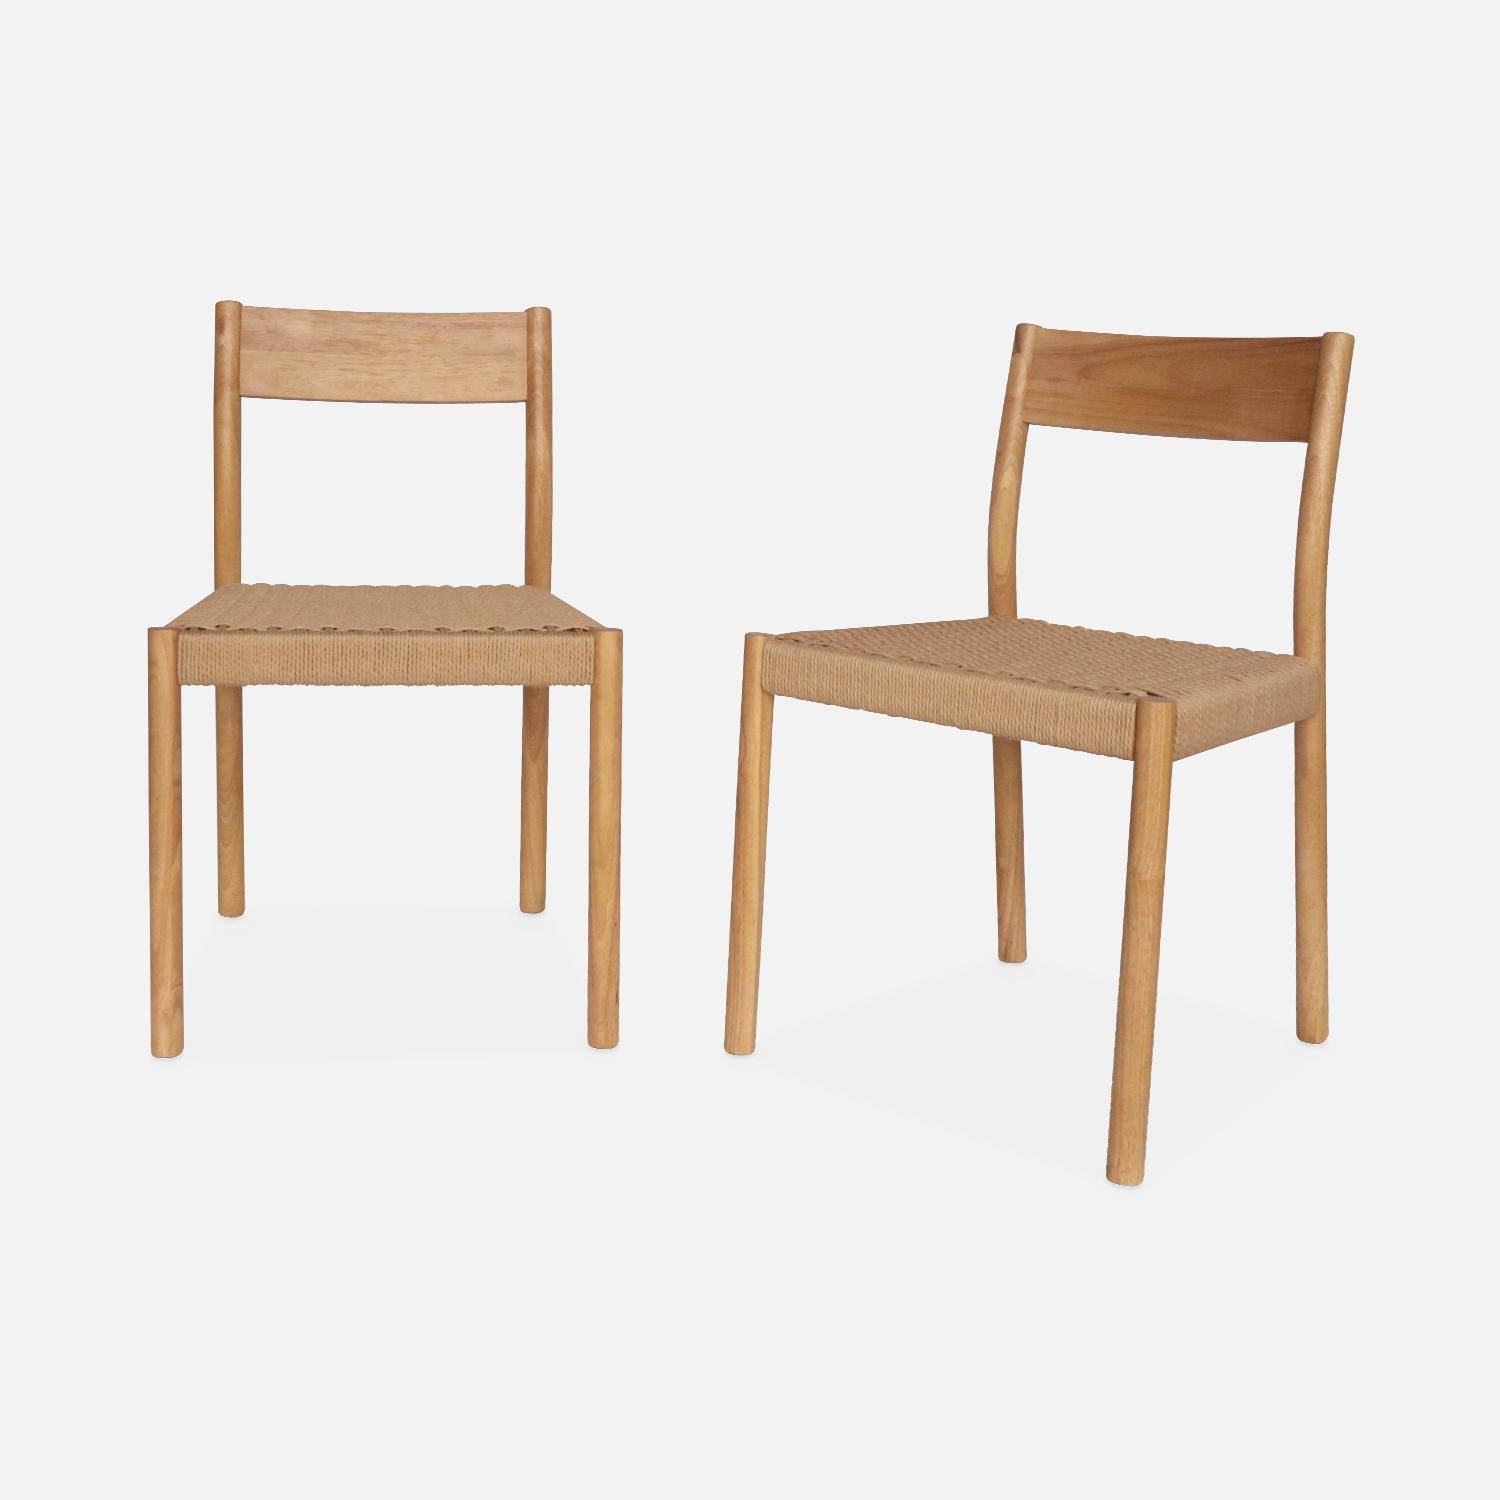 Pair of timeless design Wood and Rope Dining Room chairs, natural,  L49.5 x W53 x H82 cm Photo4